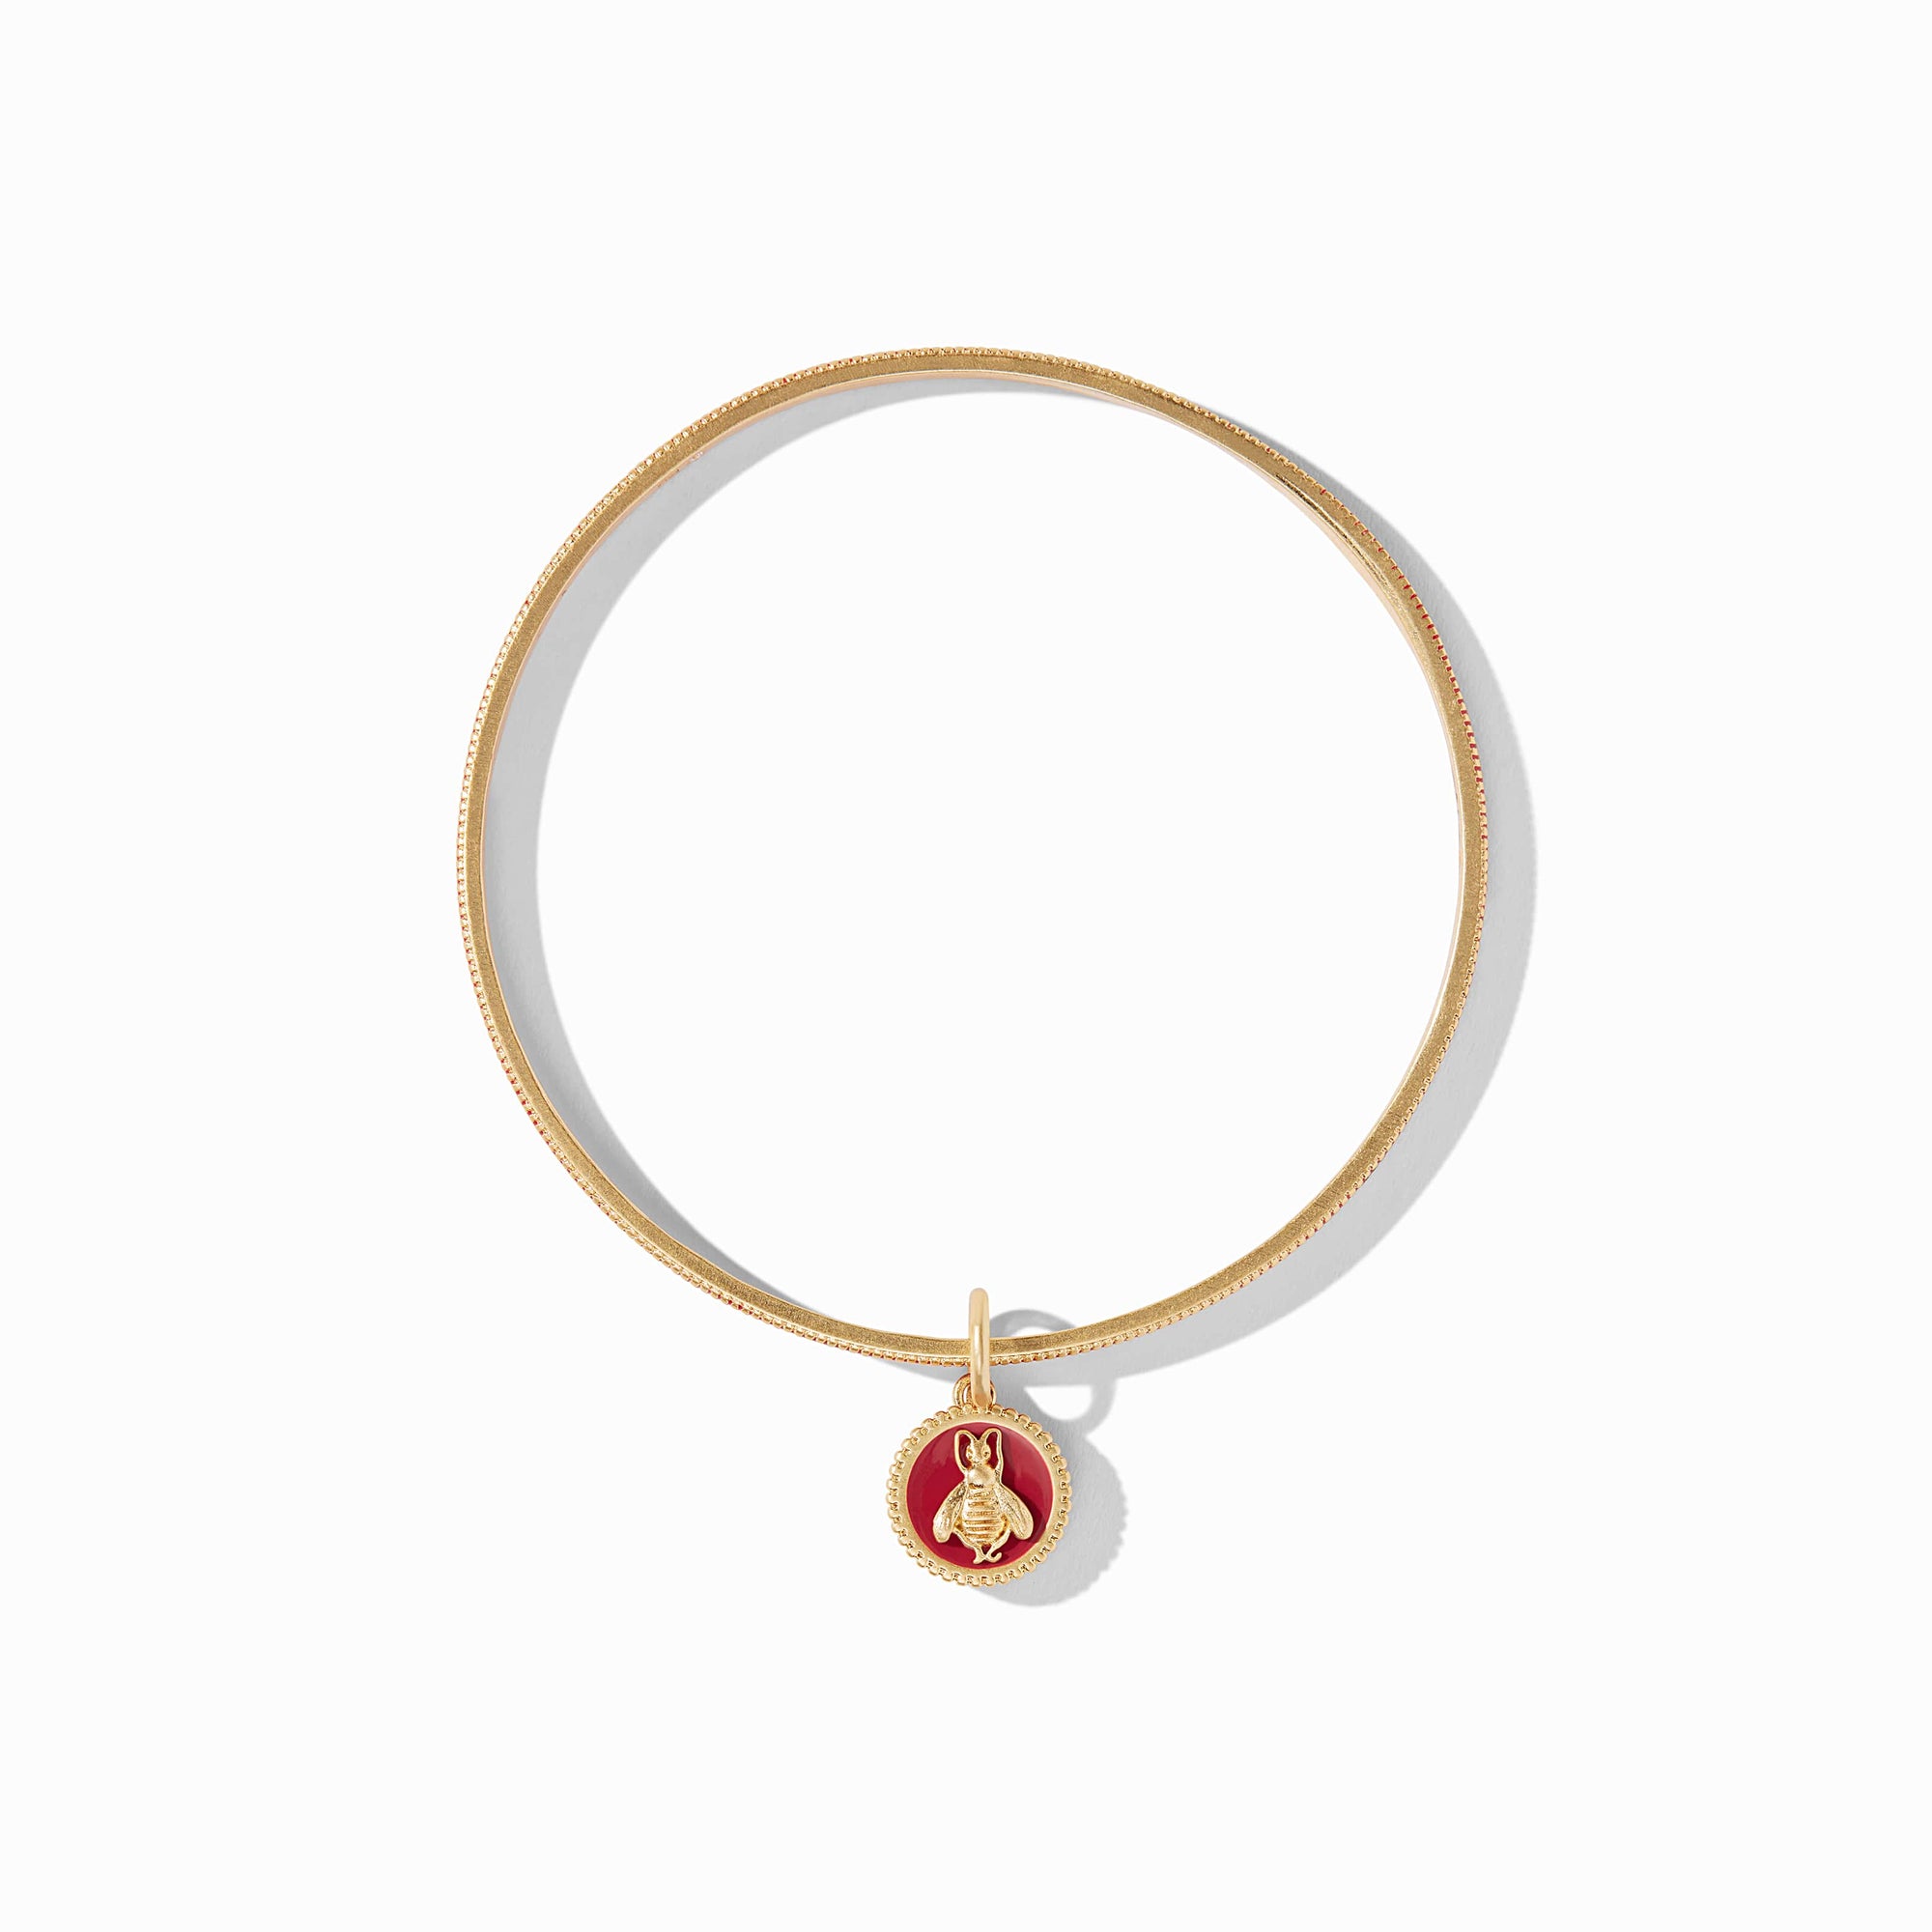 Julie Vos - Bee Cameo Bangle, Mulberry Enamel / Large